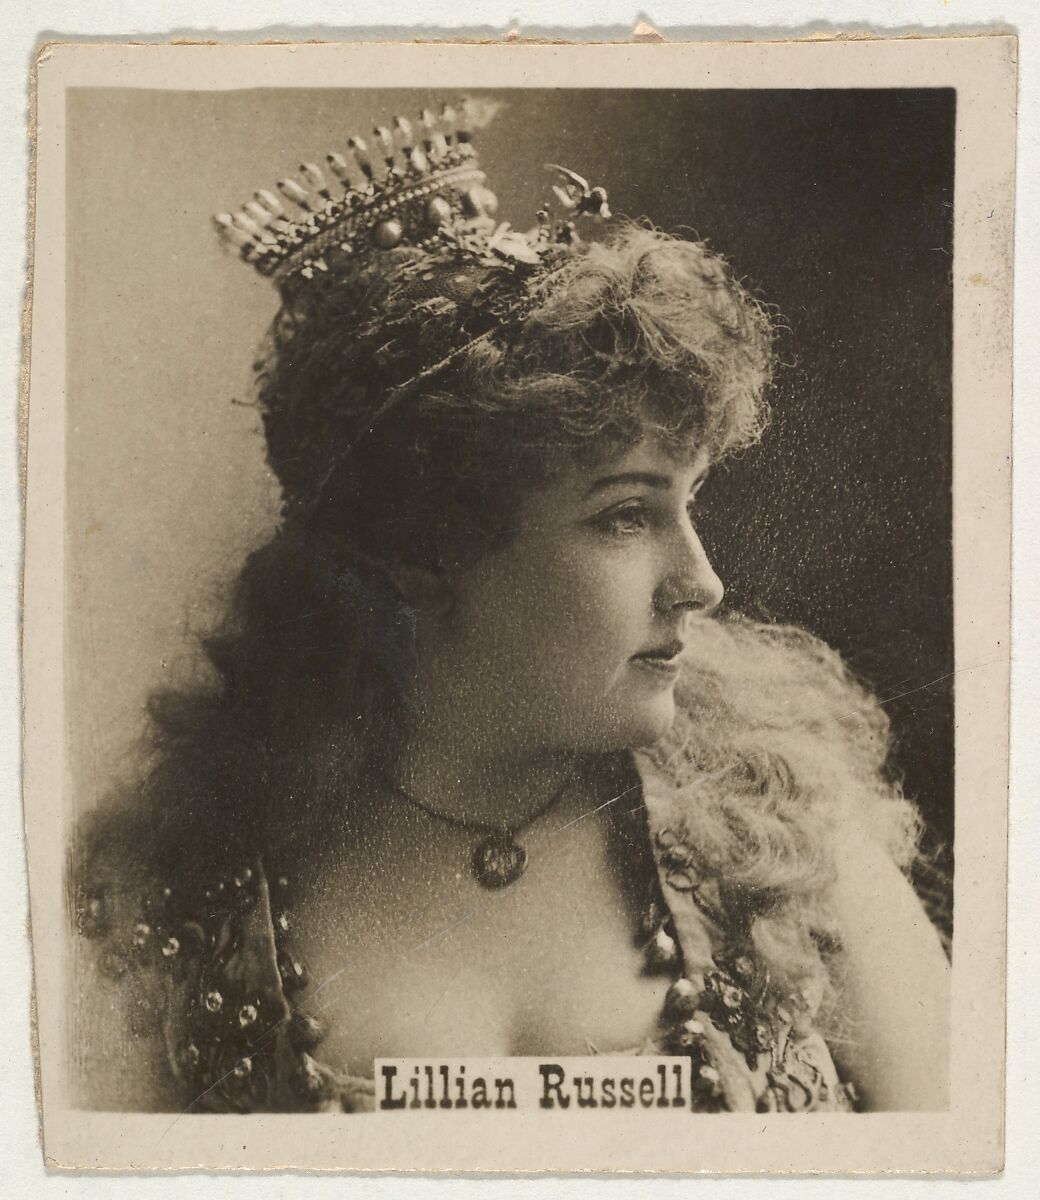 Issued By Neil Mccoull Co Lillian Russell From The Actresses Series T123 Type 1 Issued 3741